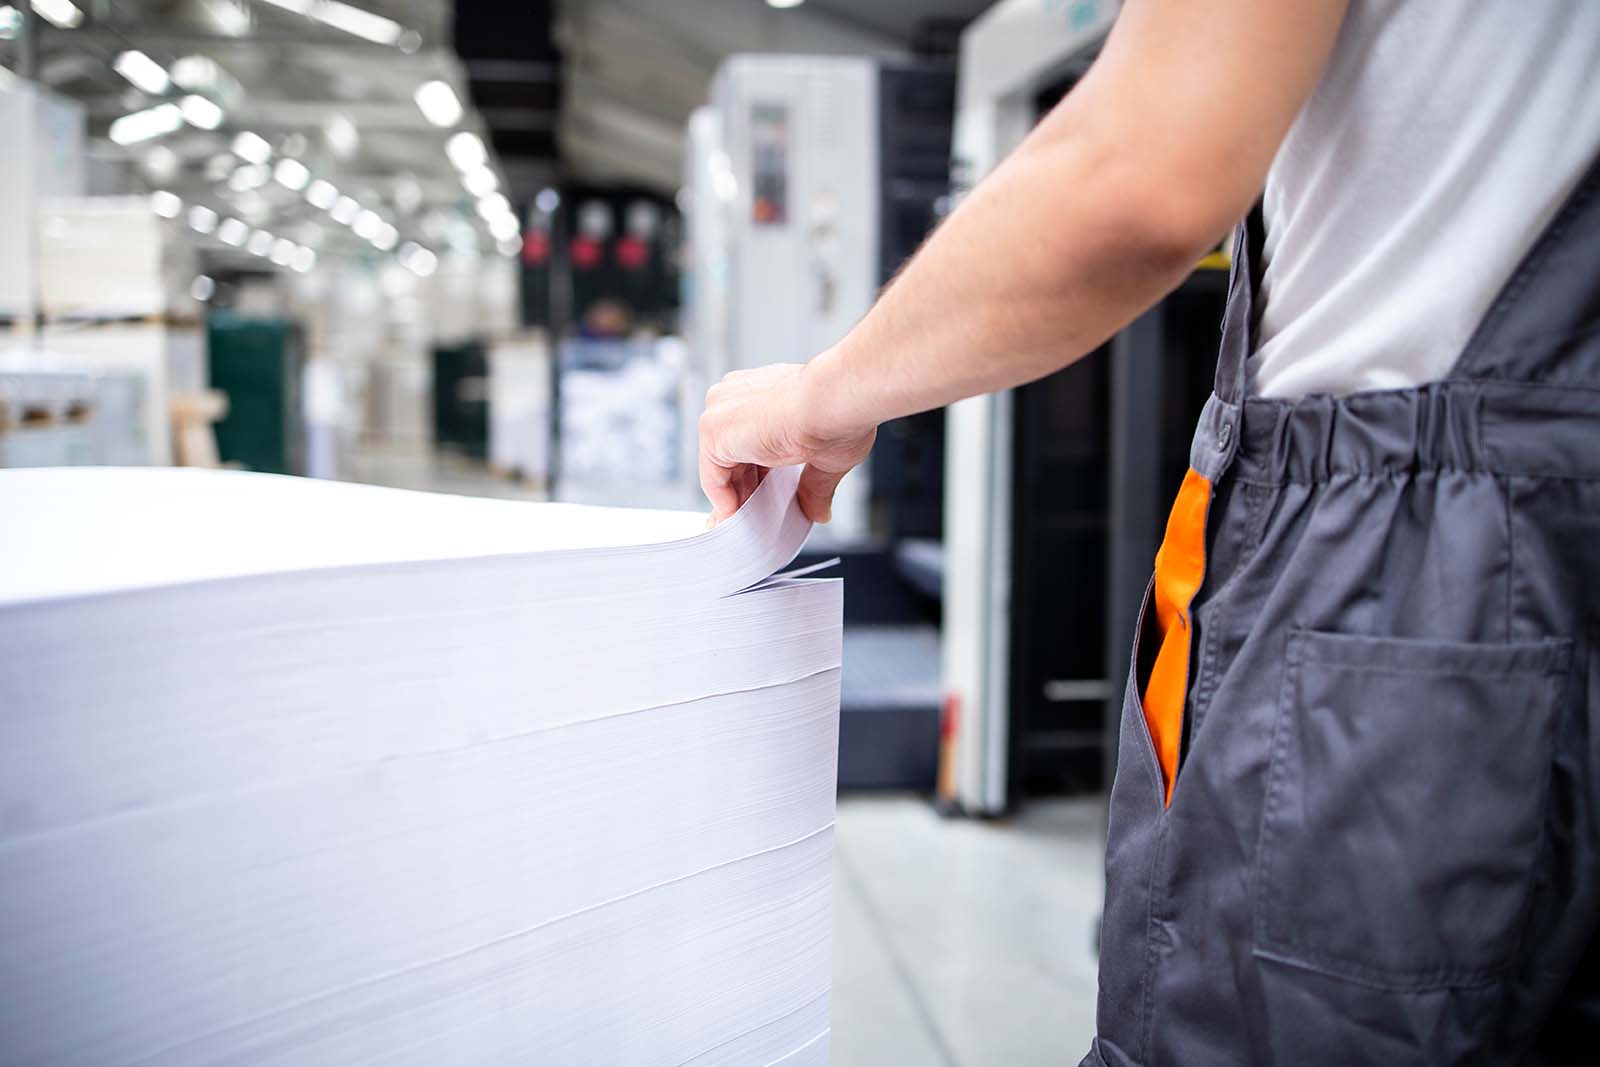 A factory assistant is holding a stack of paper.